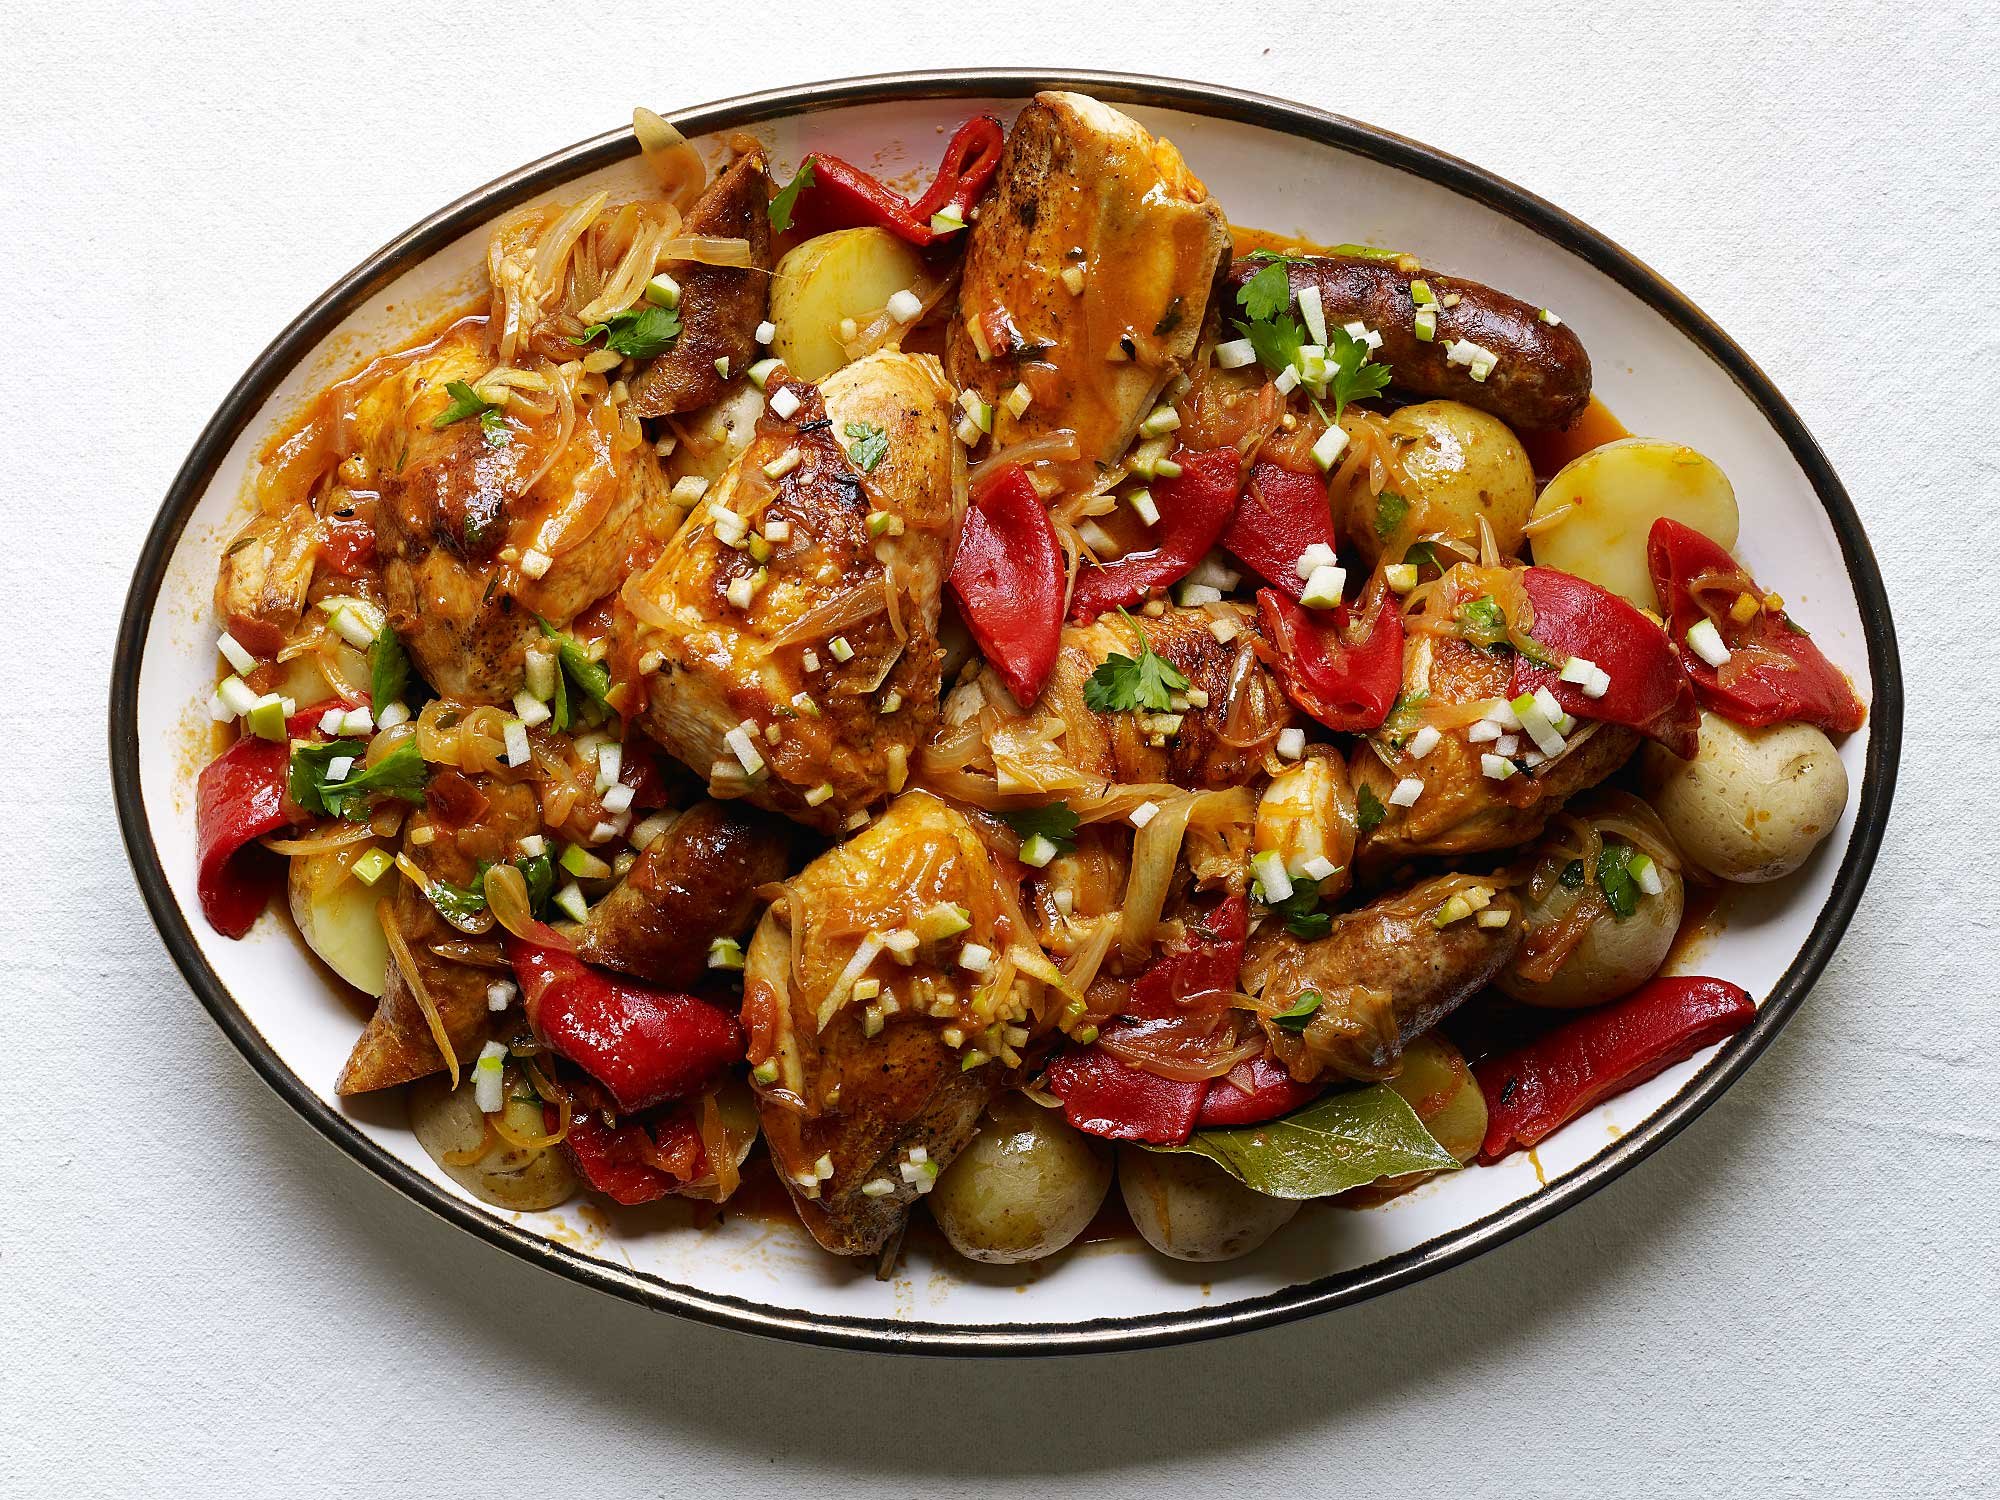 Basque Braised Chicken with Peppers (Chicken Basquaise)